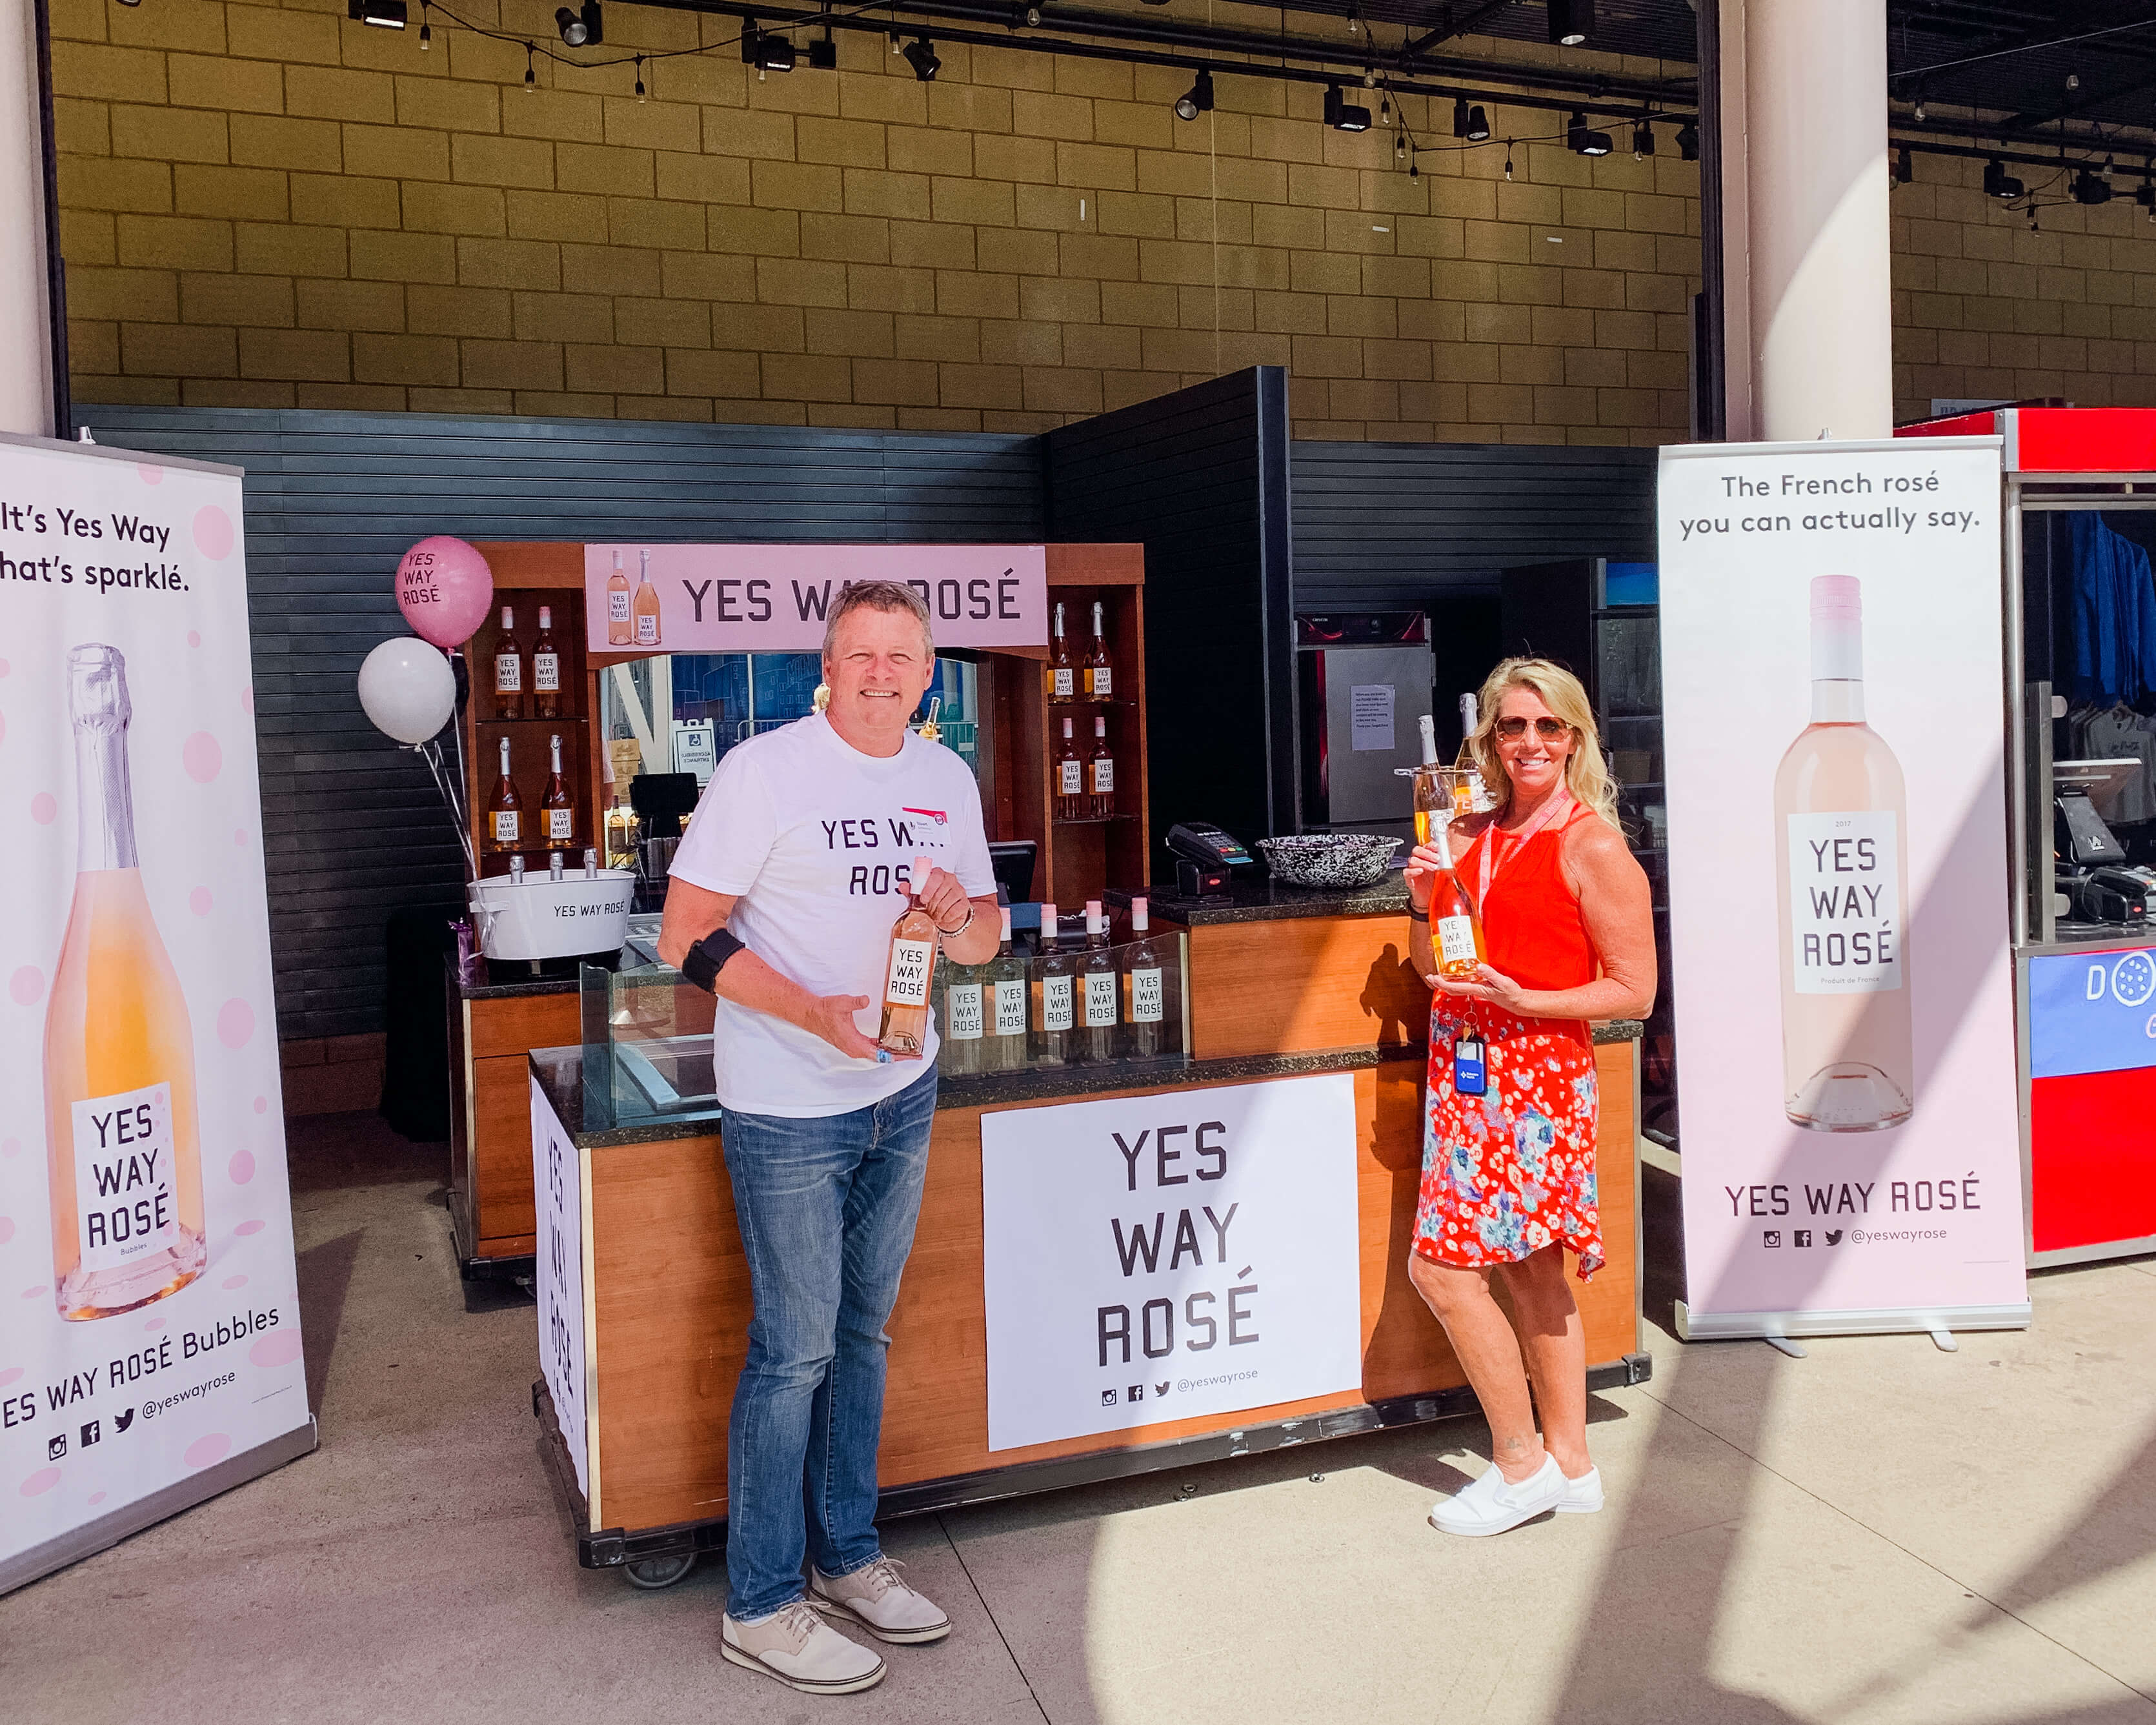 A section for yes way rose and 2 people holding 2 ywr bottles